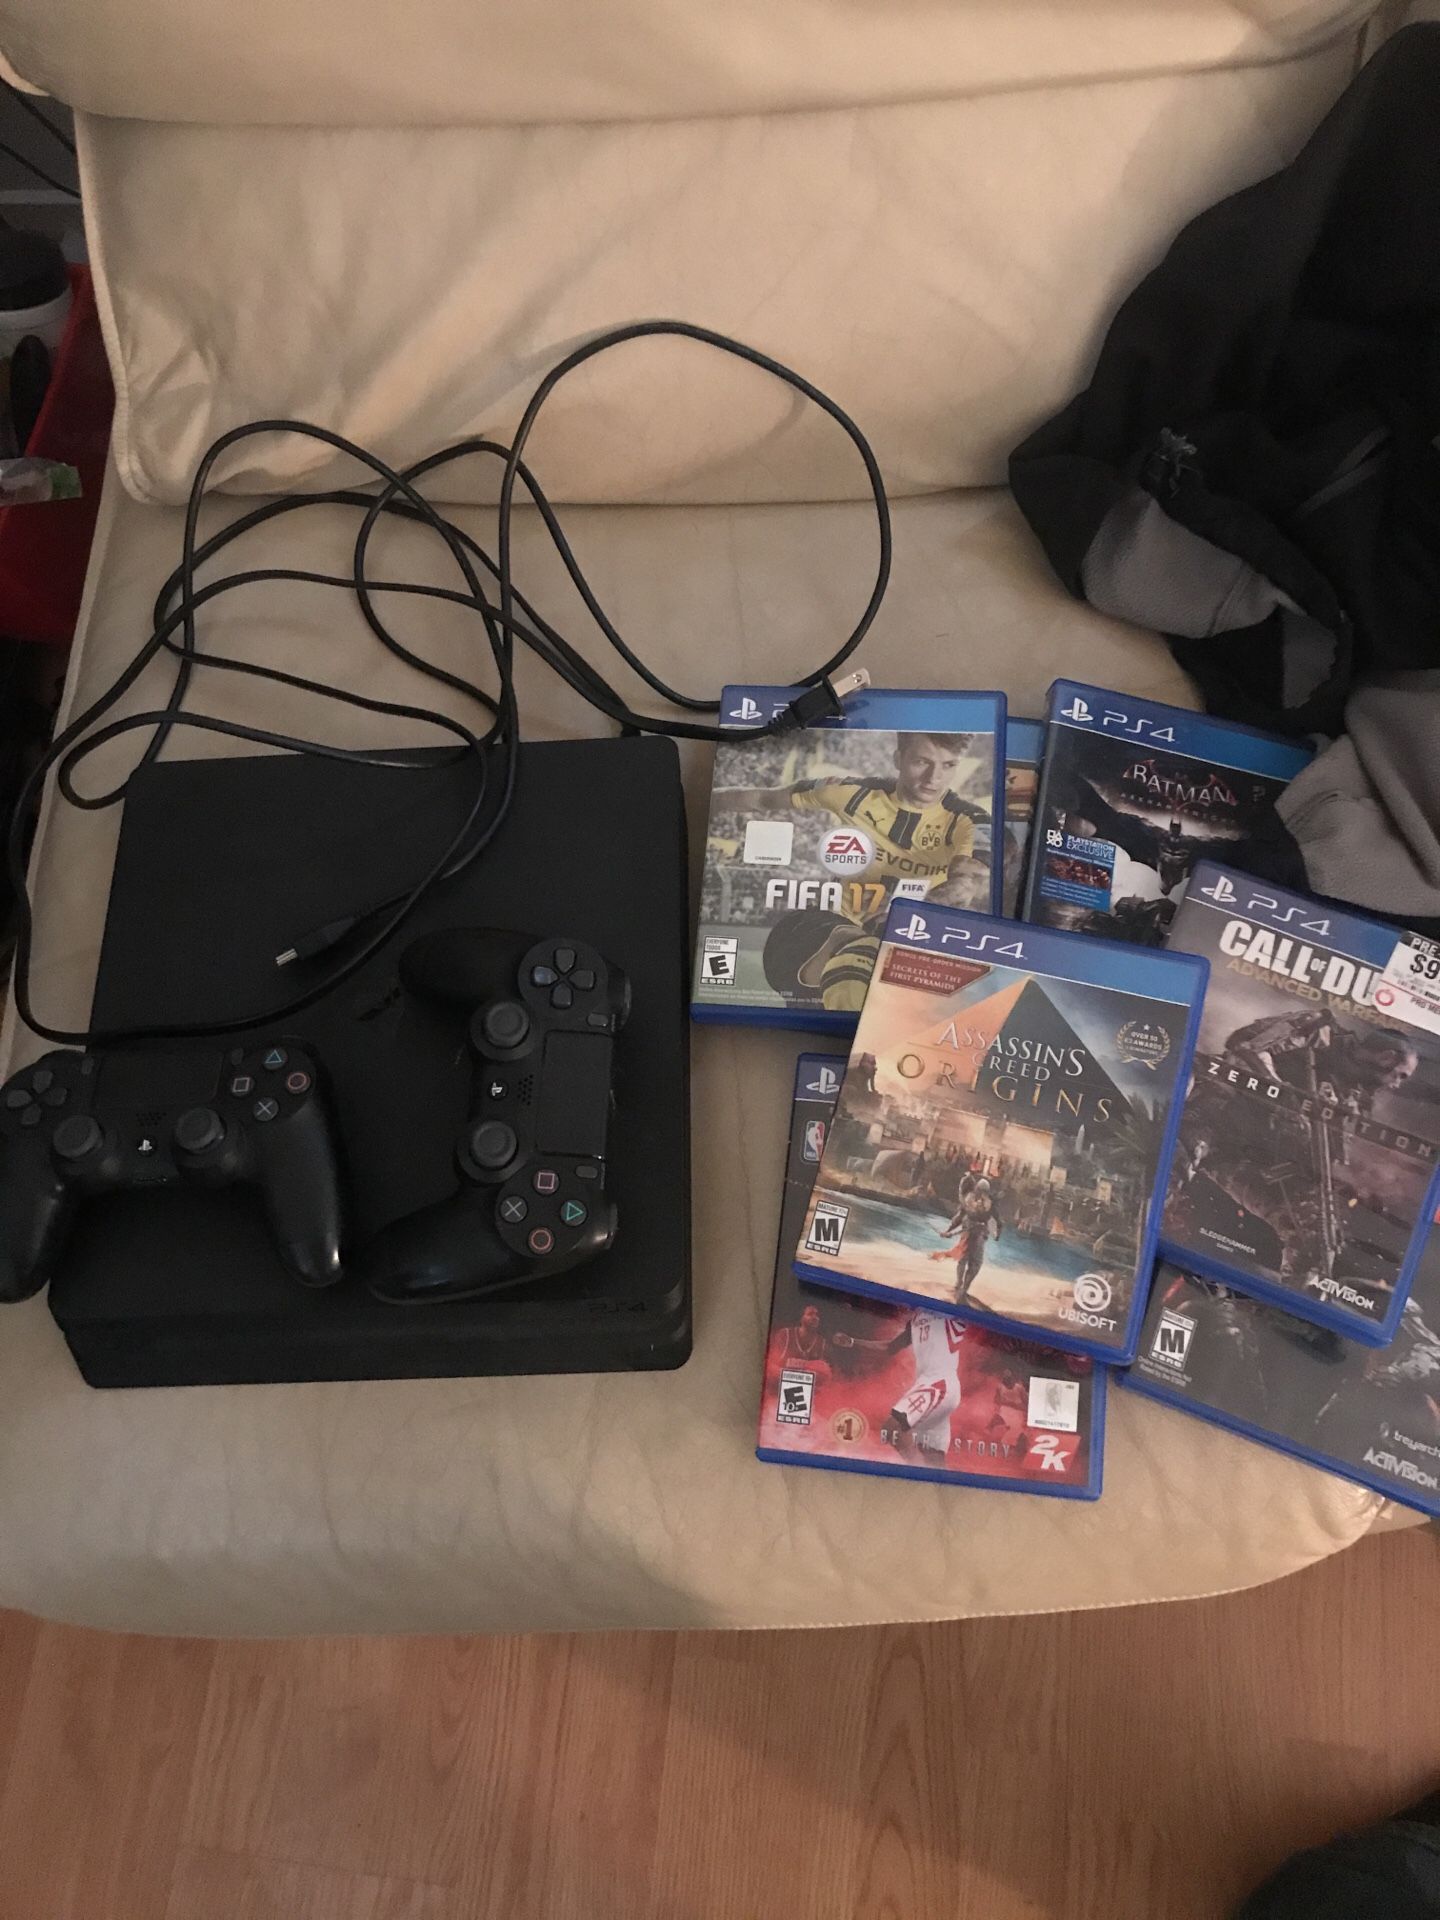 Ps4 slim 2 controllers games worth over $100 with cables. $300